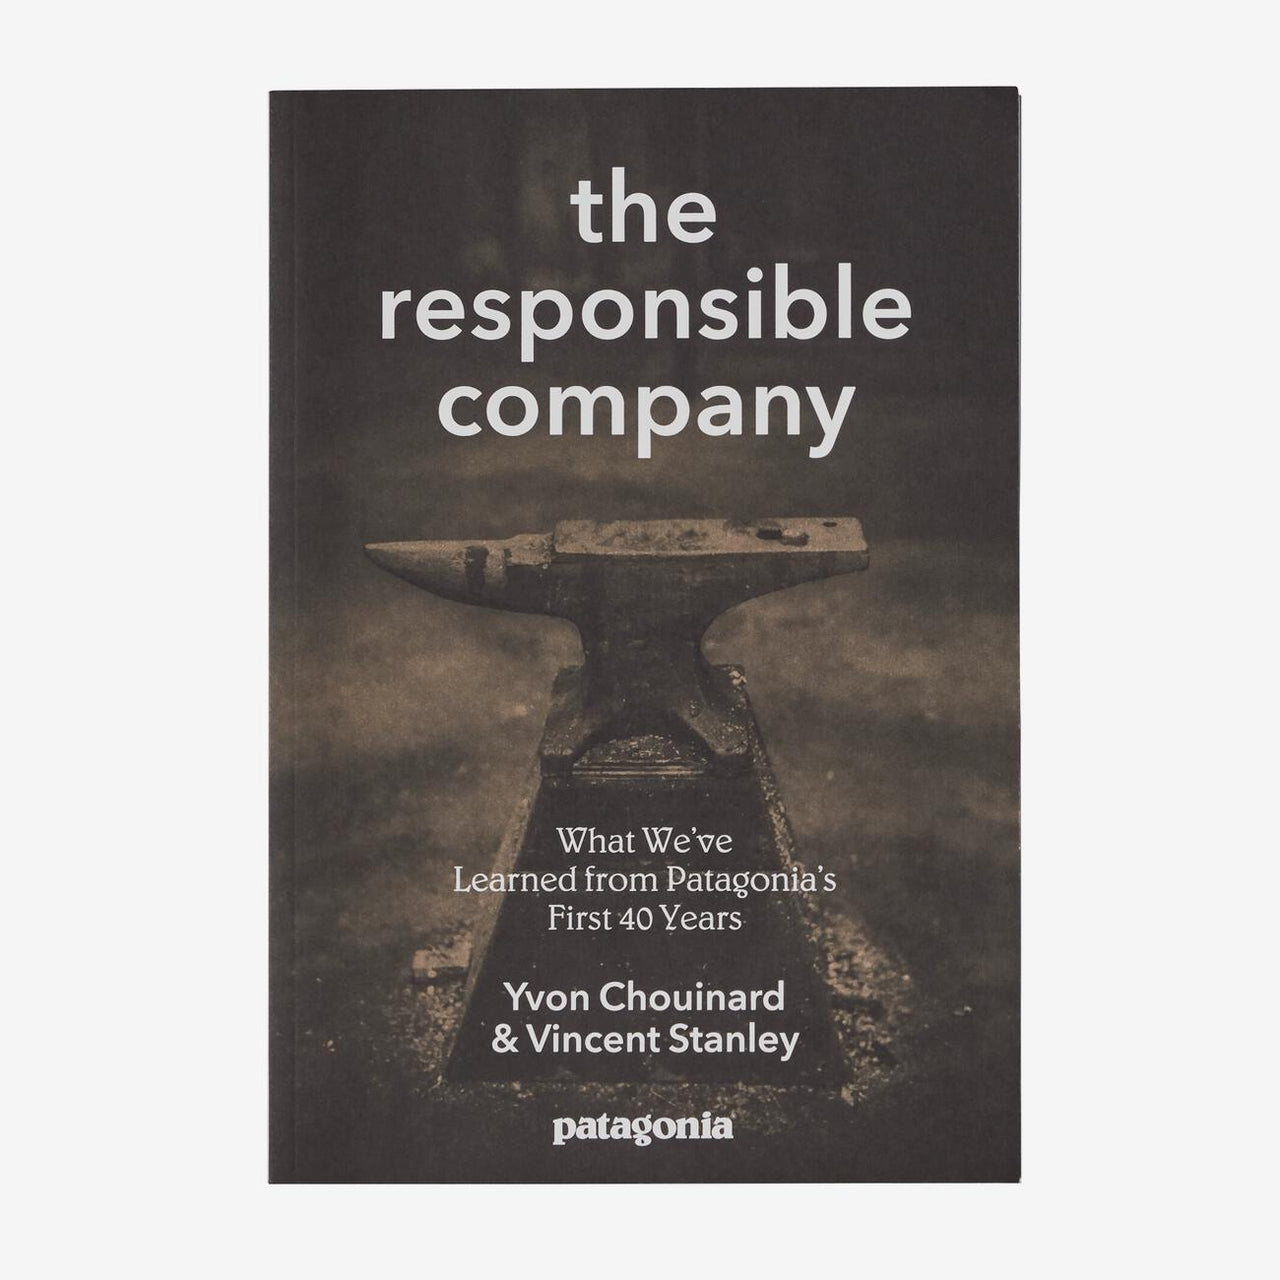 The Responsible Company: What We've Learned From Patagonia's First 40 Years by Yvon Chouinard & Vincent Stanley BK233